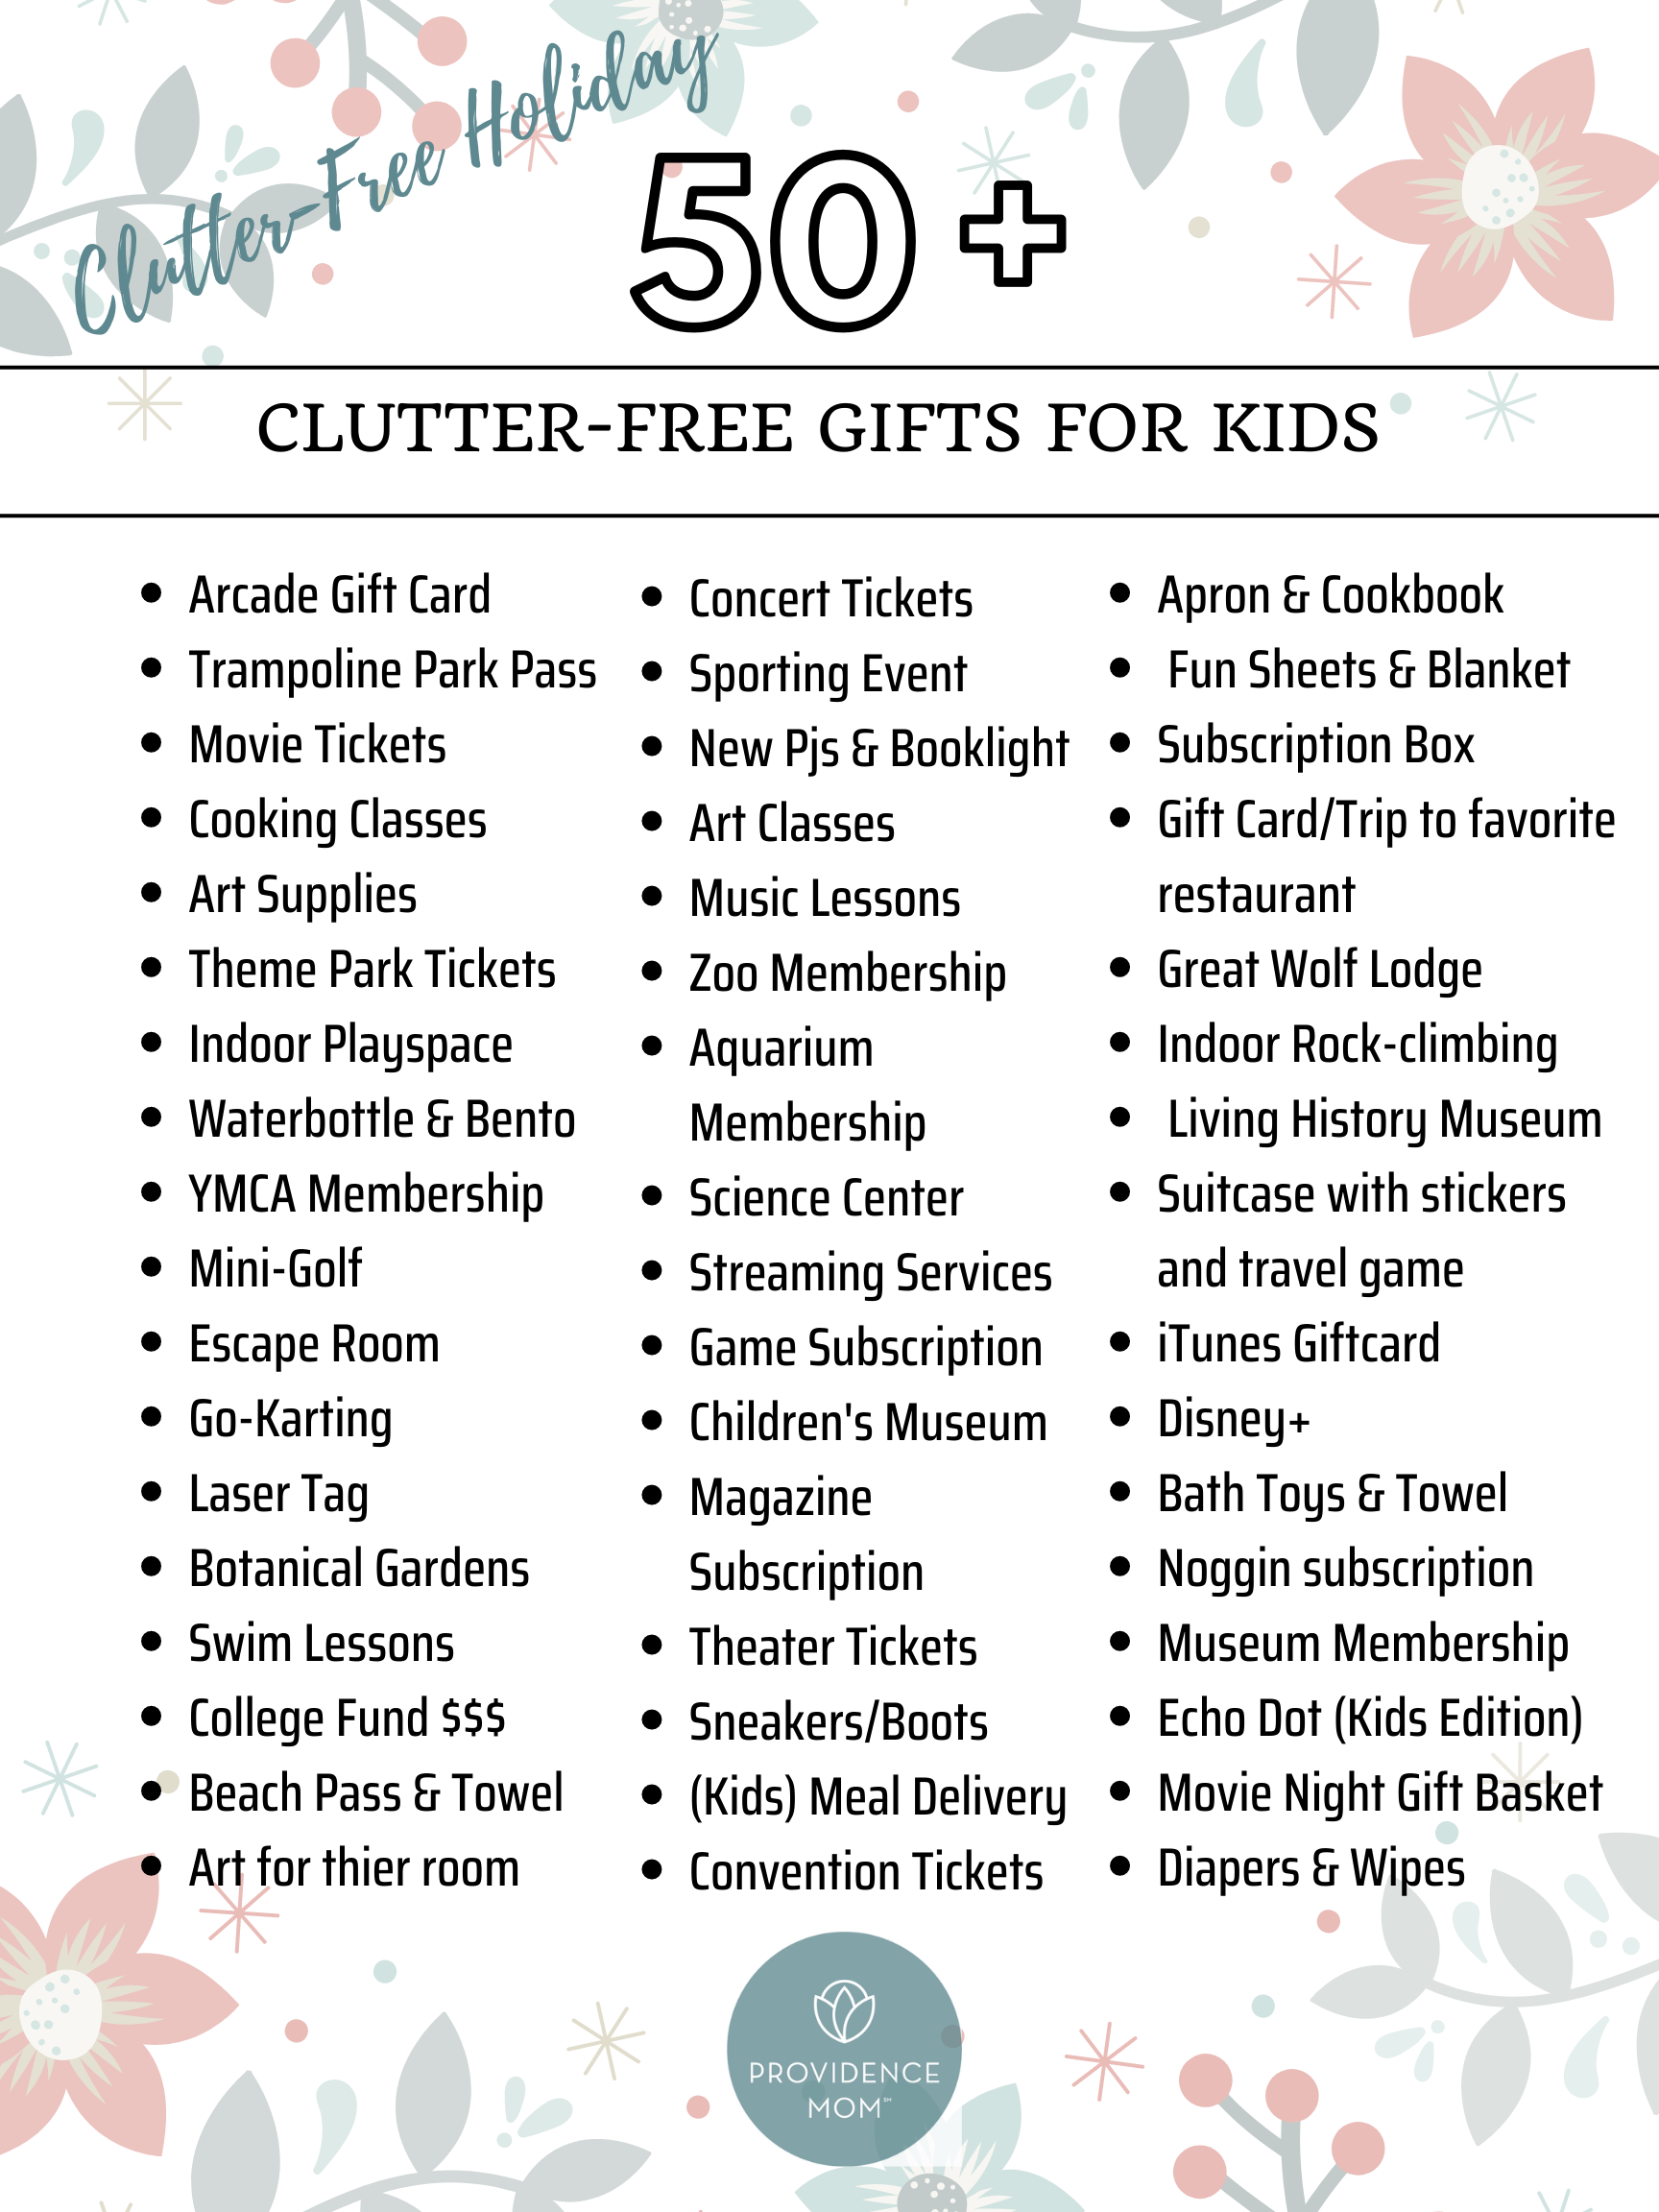 Clutter Free Gifts for Kids (Or 50 ideas!)